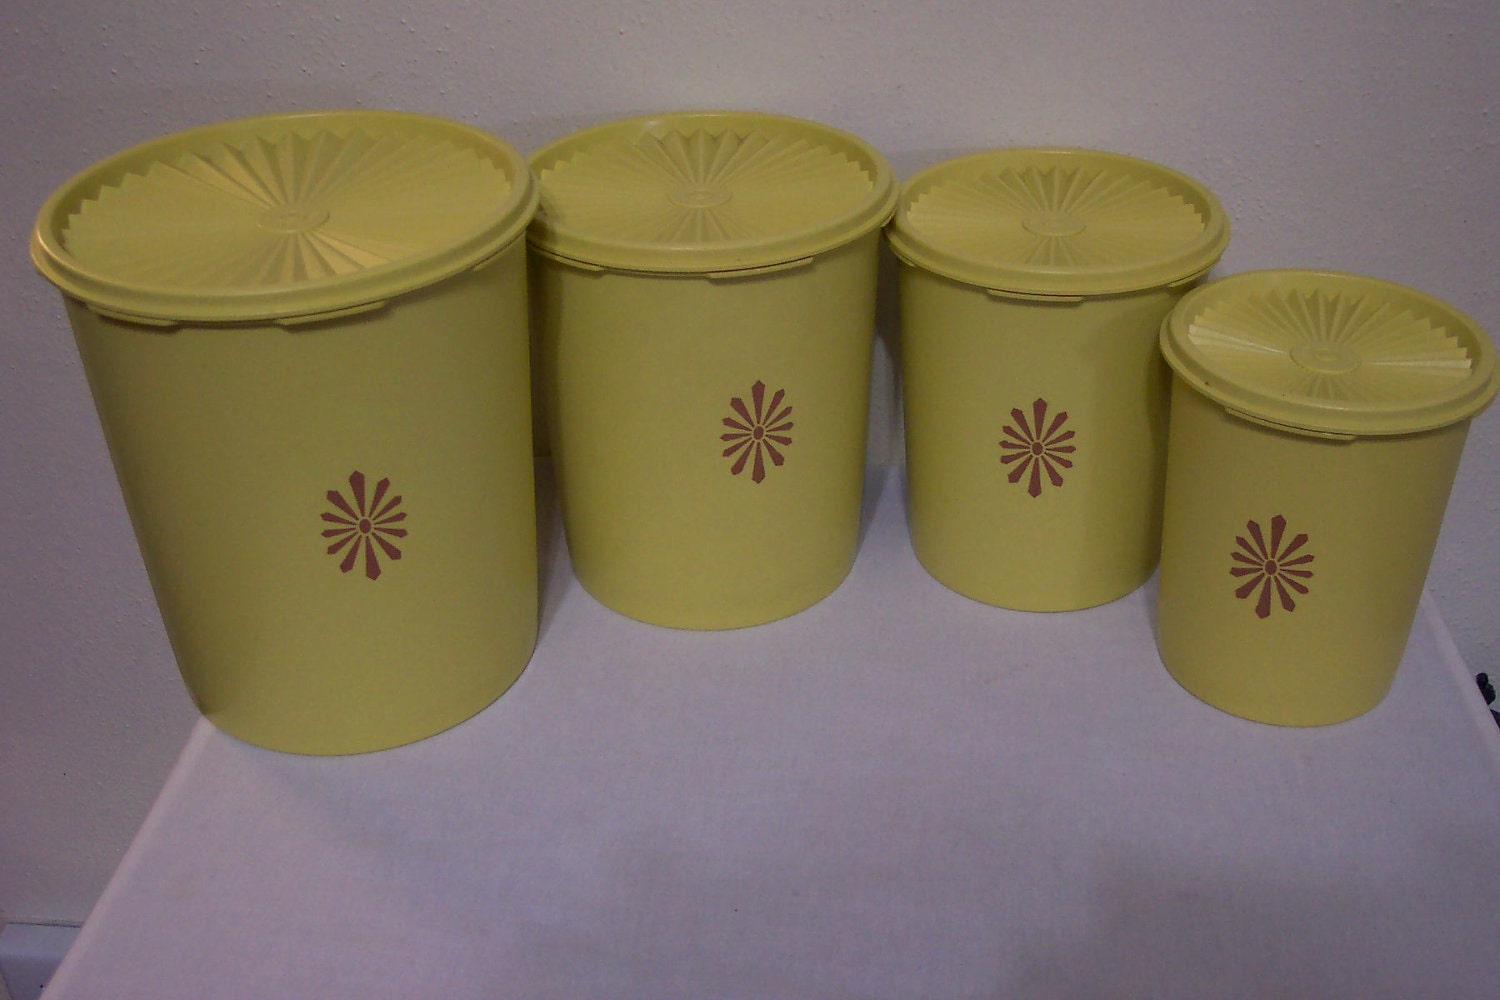 Vintage Tupperware Canister Set in Cactus Yellow Set of 4